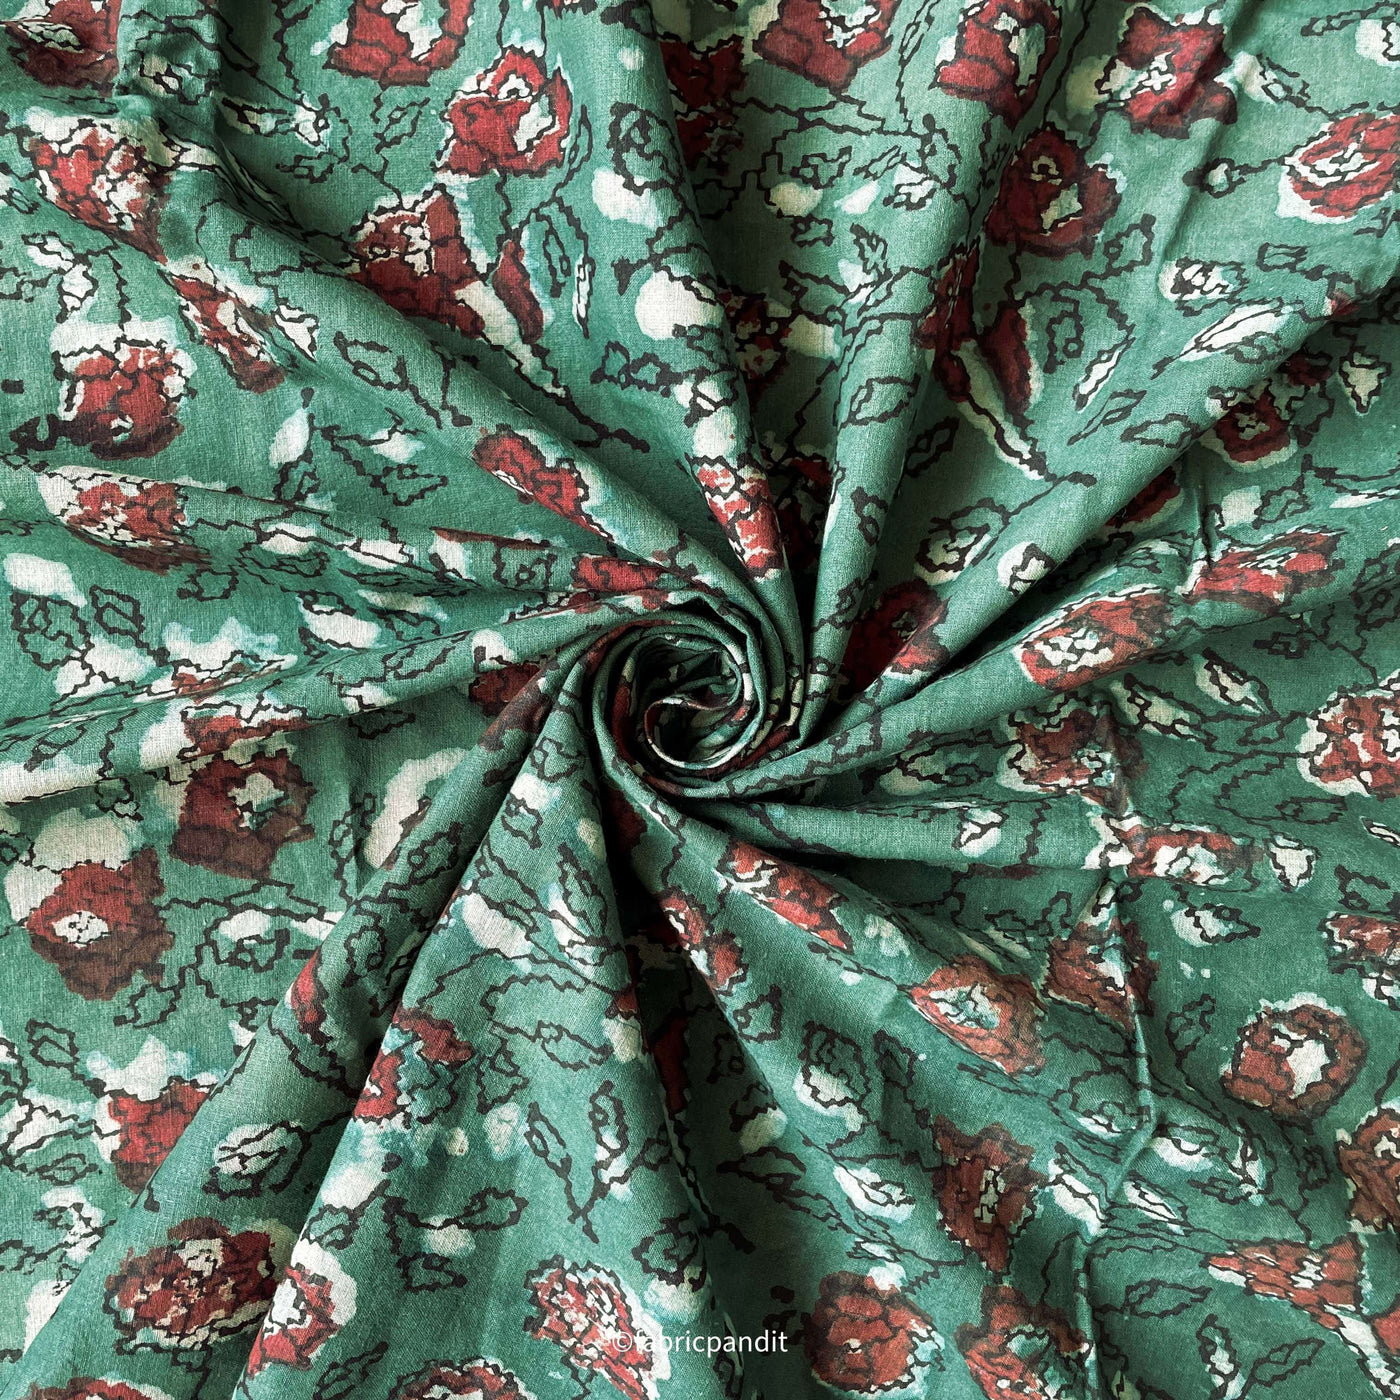 Fabric Pandit Fabric Olive Green & Red Abstract Floral Hand Block Printed Pure Cotton Fabric (Width 42 inches)